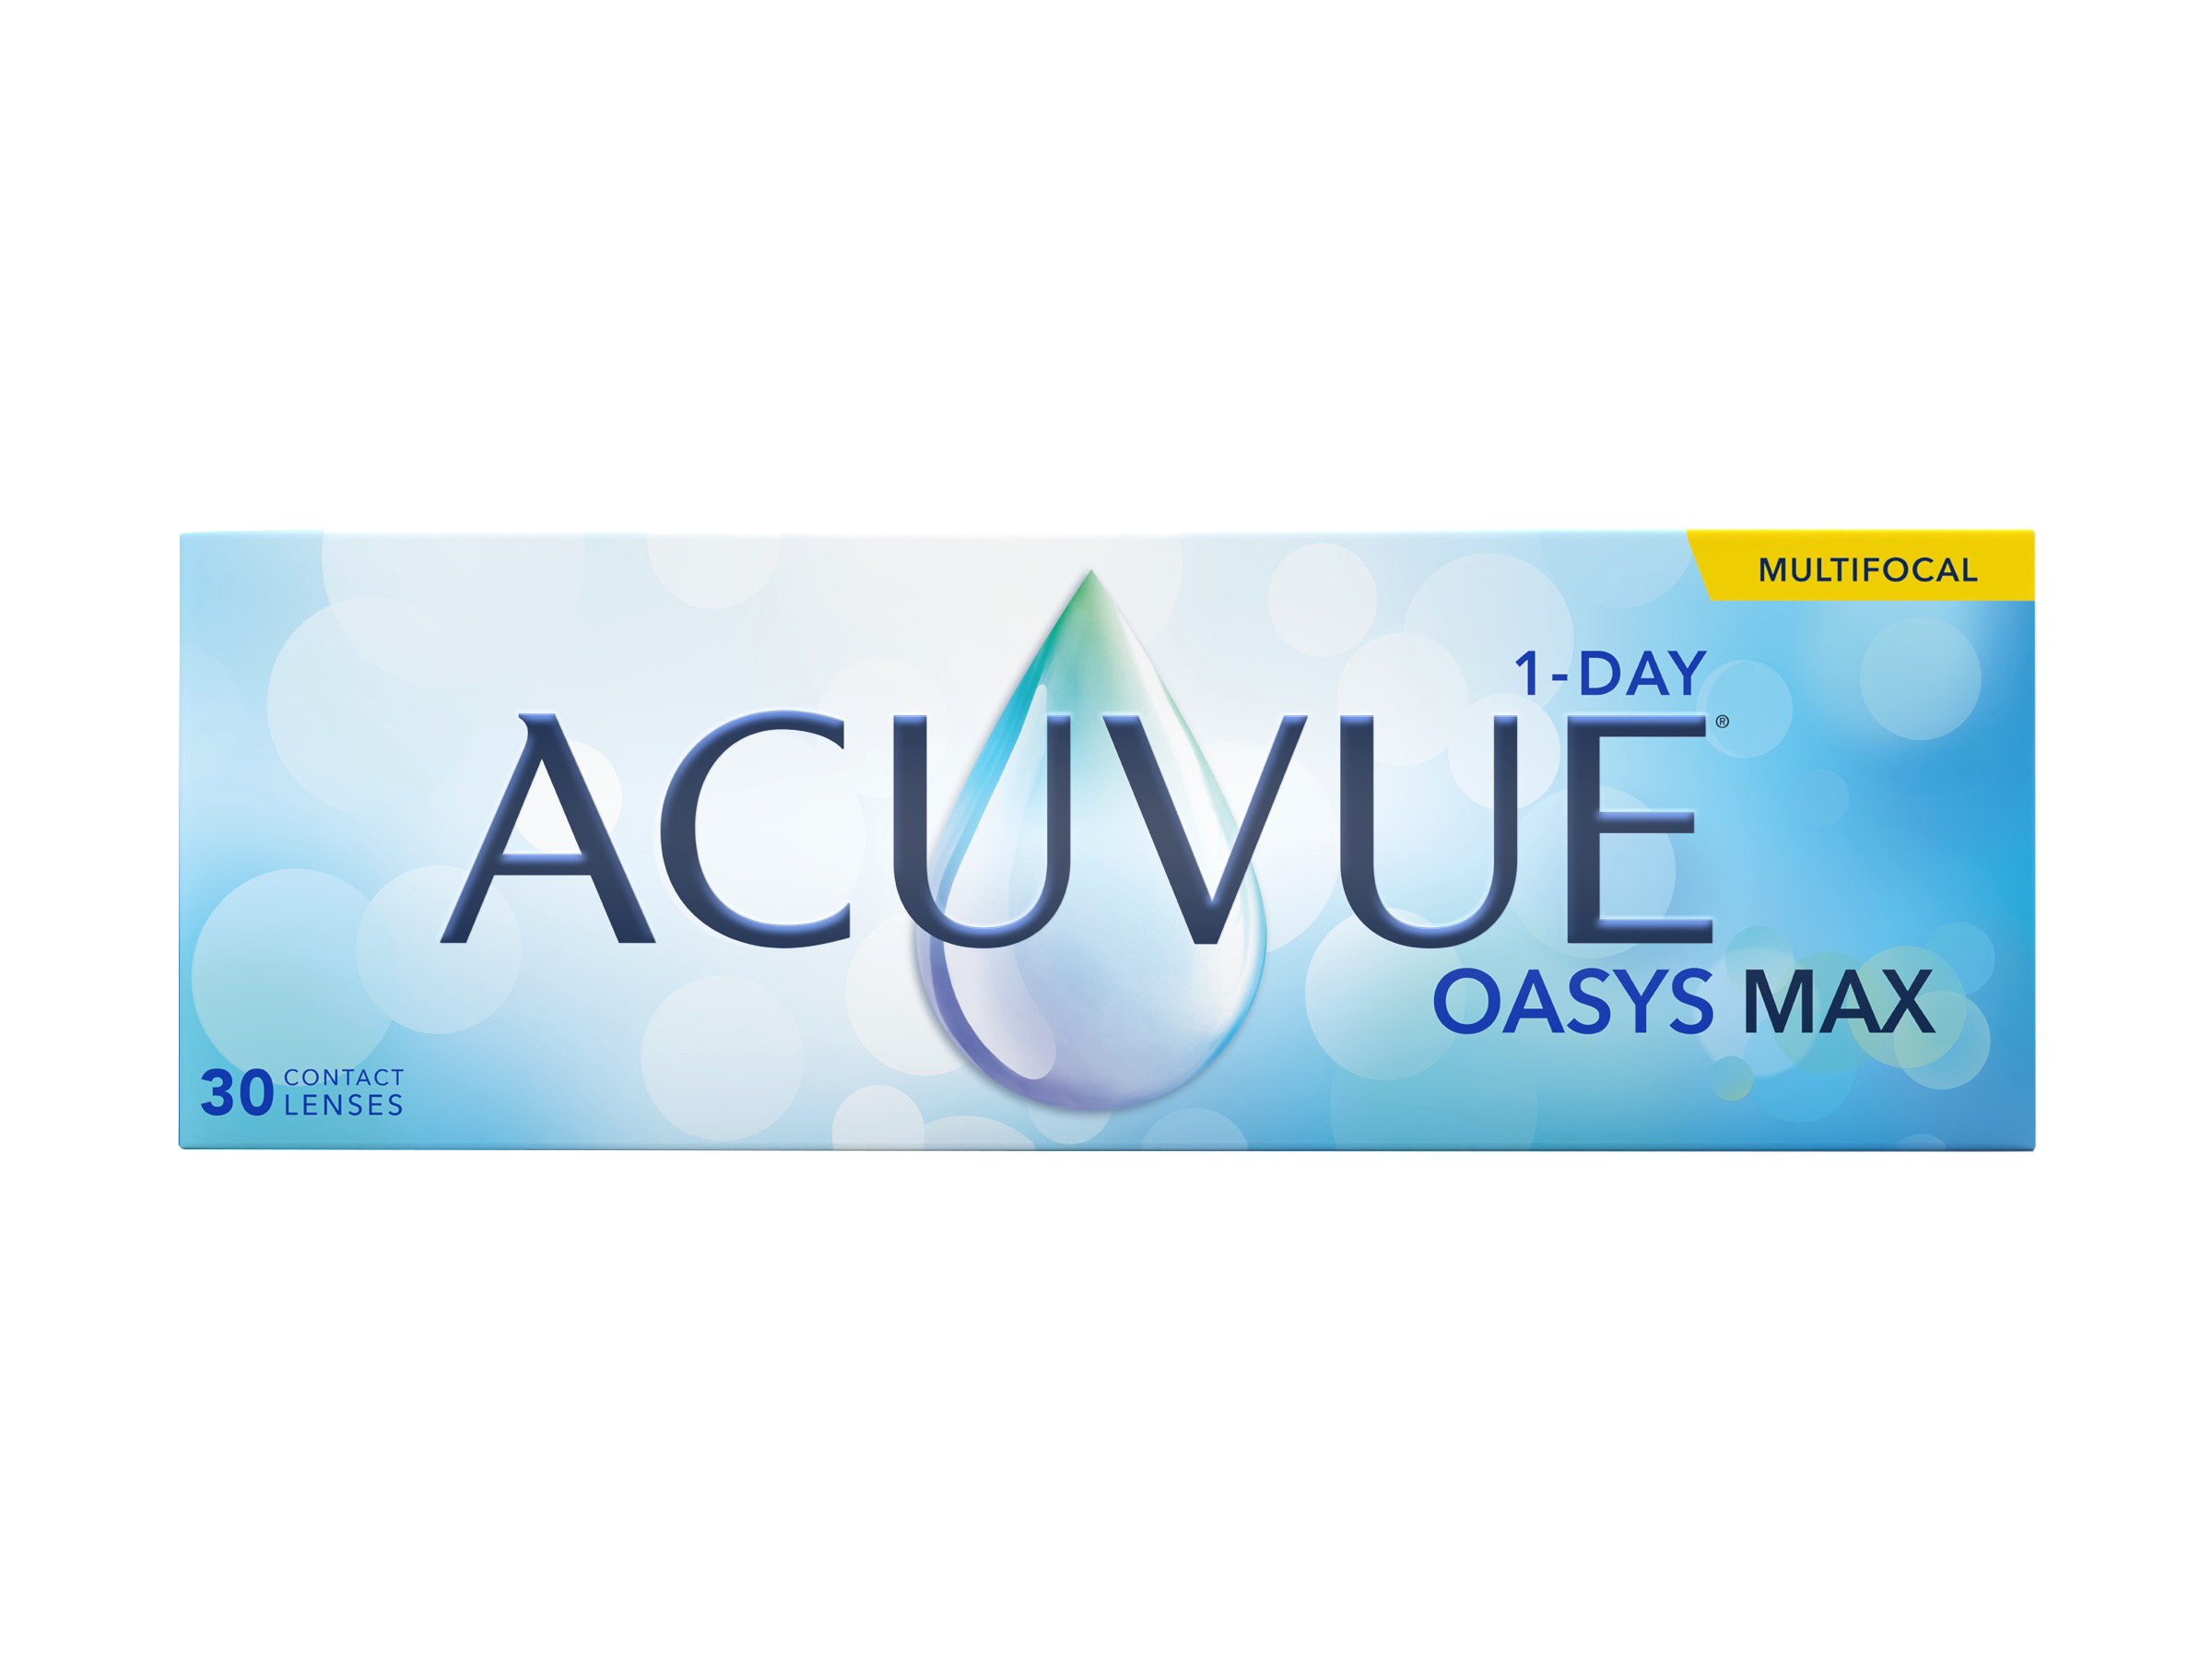 ACUVUE OASYS MAX 1 DAY MULTIFOCAL (30pk)